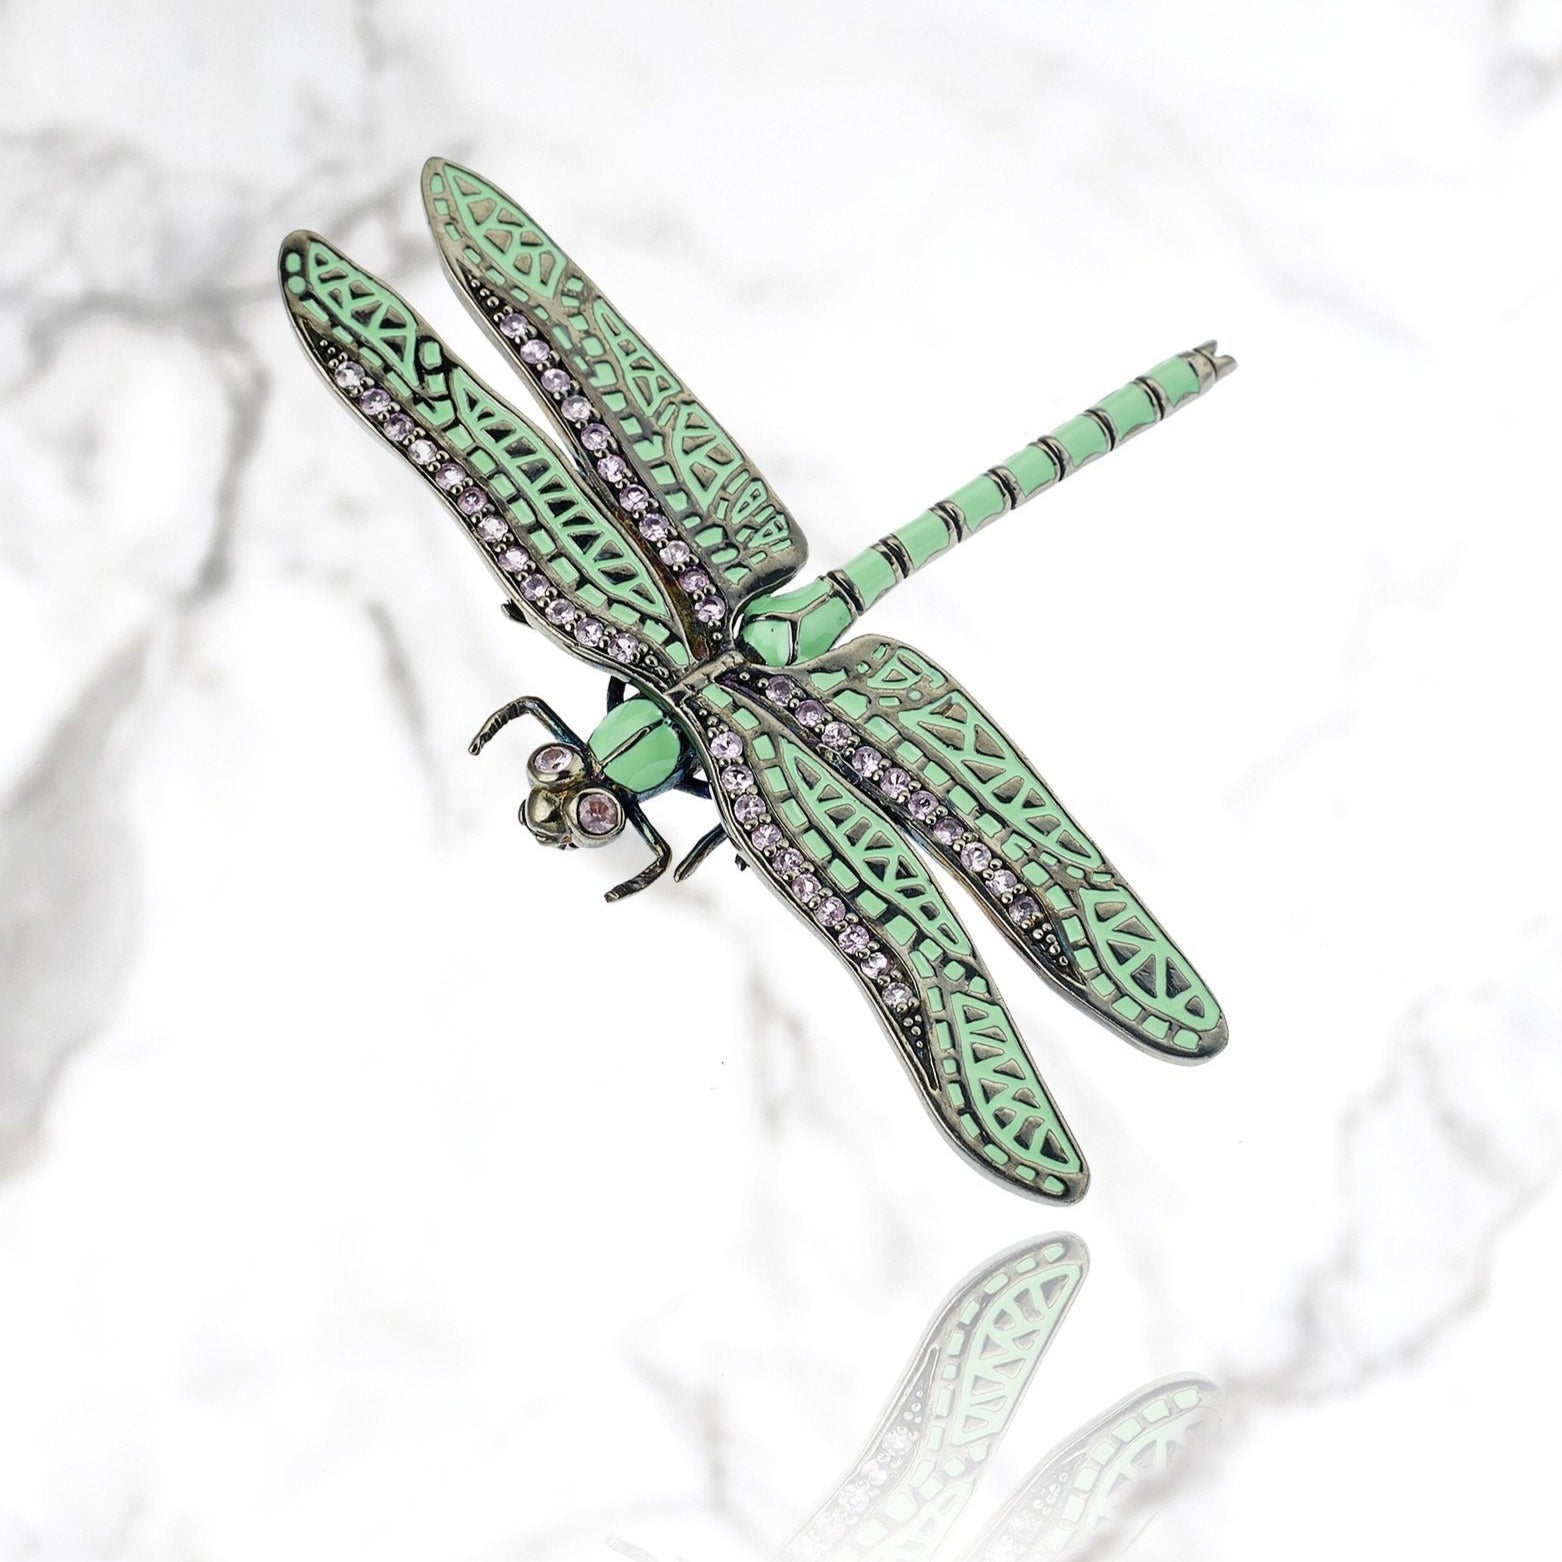 MCL Design dragonfly pin